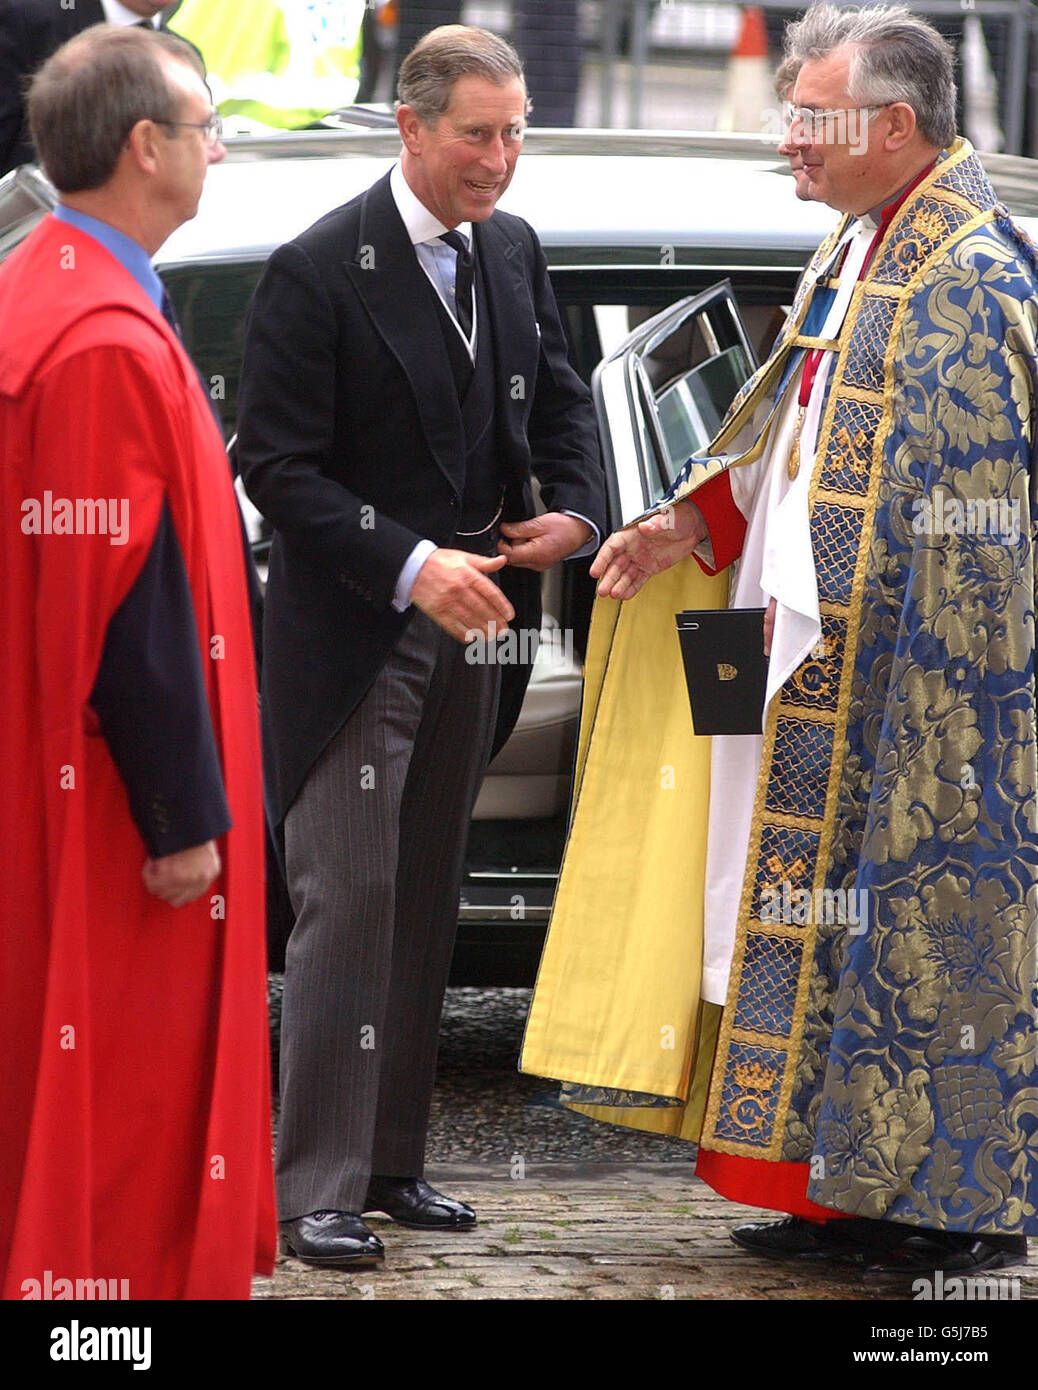 The Prince of Wales being greeted by the Dean of Westminster Abbey, Dr Wesley Carr as he arrives at a service of thanksgiving at the Abbey in London celebrating the life of comic Sir Harry Secombe. The Goon Show legend, who died in April 2001 from cancer at the age of 79. * and will be remembered by family and friends at the event. The Prince of Wales was among The Goons' most prominent fans and led the tributes following his death. Sir Harry was also known for his fine tenor singing voice which he used to great effect on the religious TV programmes he presented, such as Highway and Songs Of Stock Photo